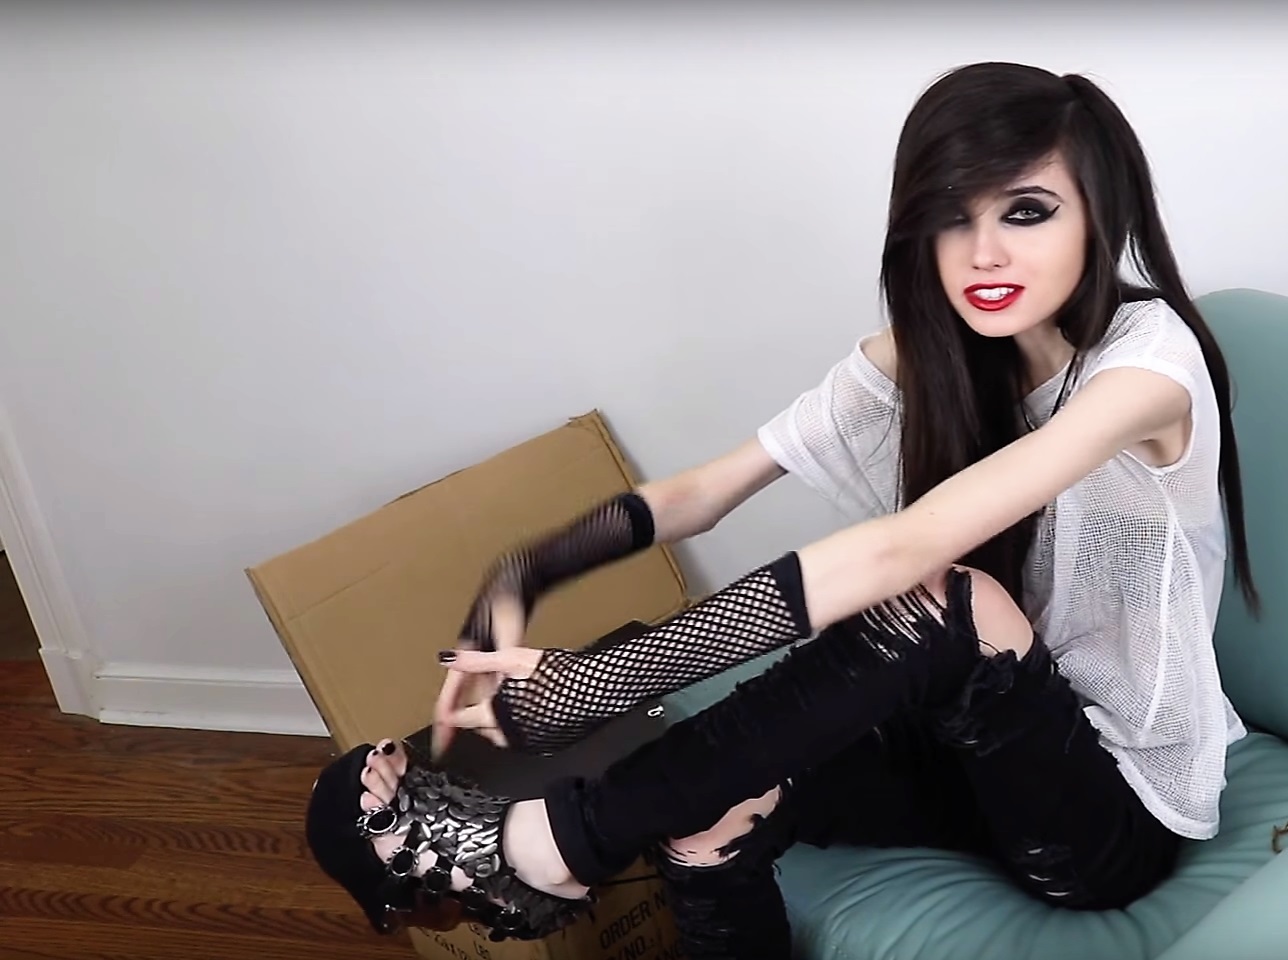 People who liked Eugenia Cooney's feet, also liked.